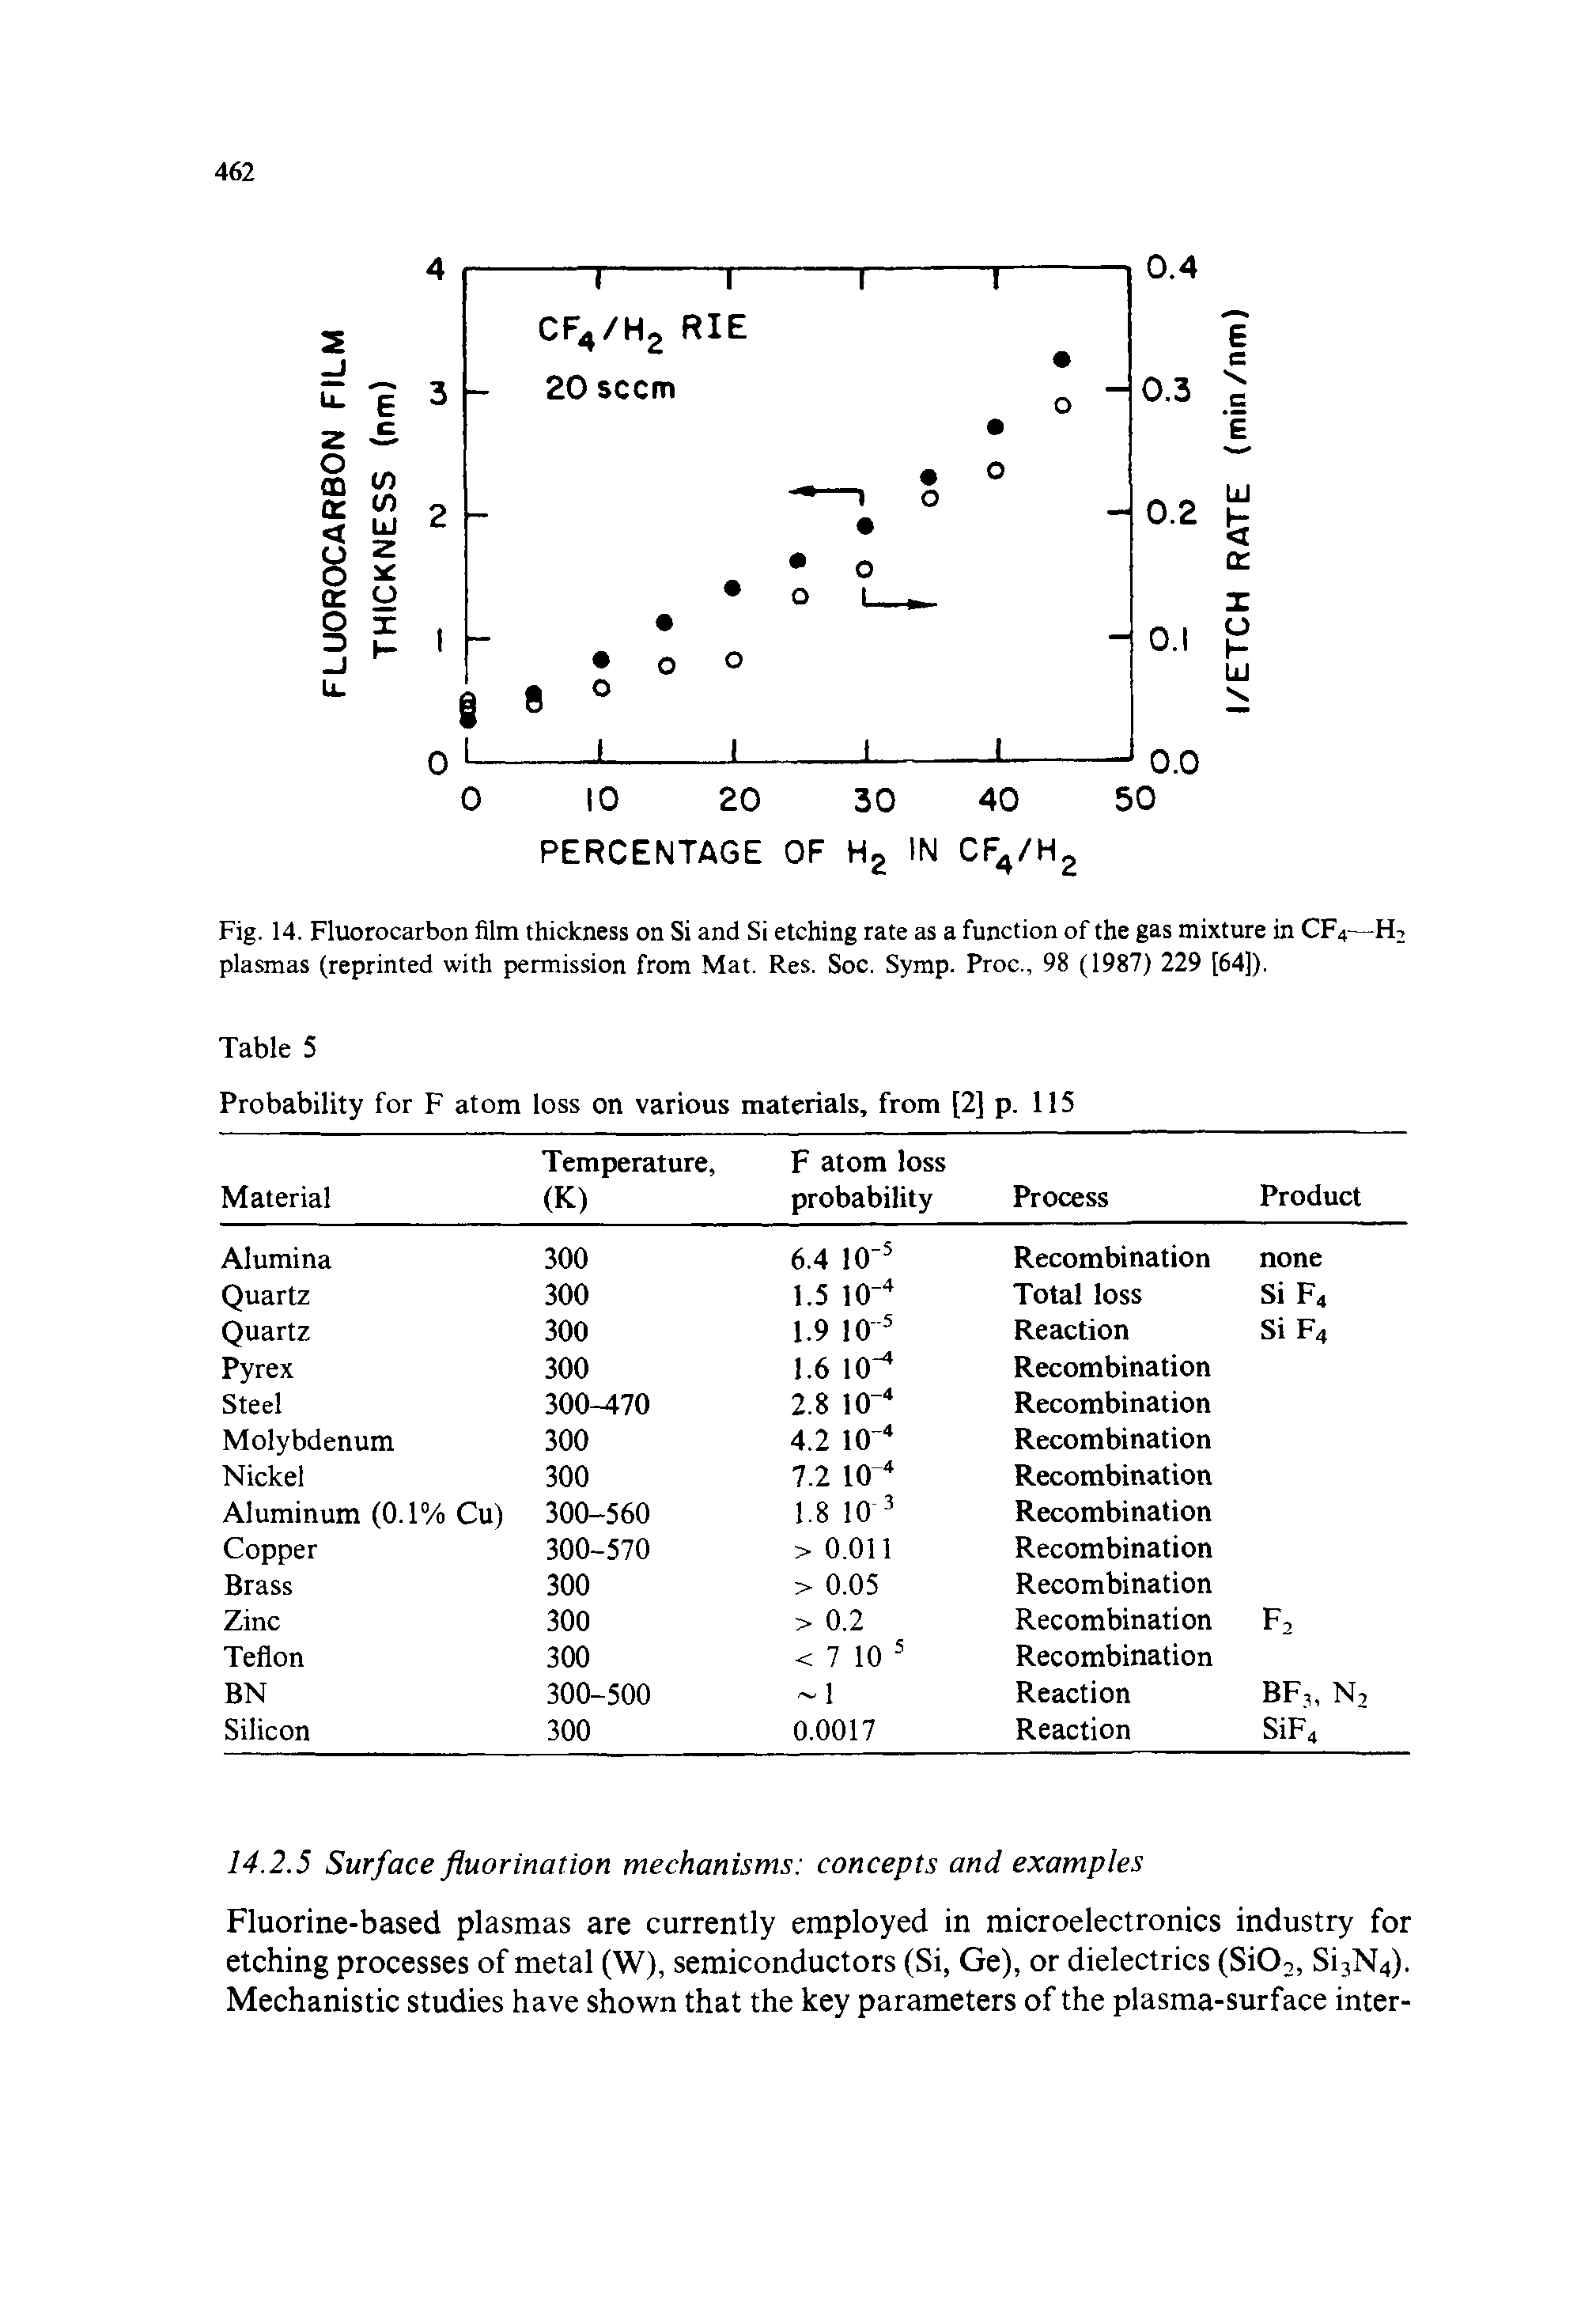 Fig. 14. Fluorocarbon film thickness on Si and Si etching rate as a function of the gas mixture in CF4—H2 plasmas (reprinted with permission from Mat. Res. Soc. Symp. Proc., 98 (1987) 229 [64]).